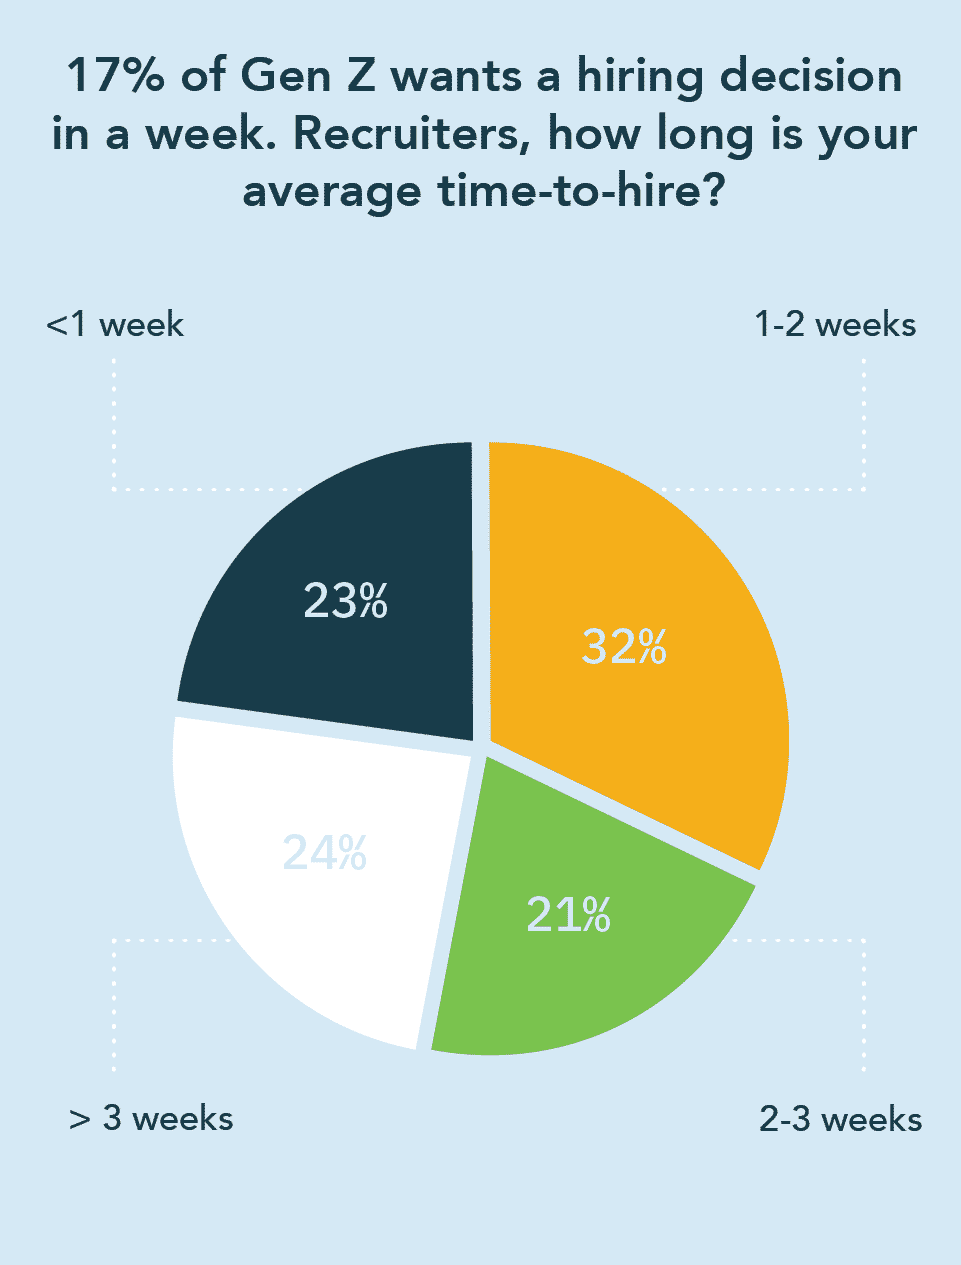 Pie chart showing that 17% of GenZ wants a hiring decision in a week and asking recruiters how long their average time-to-hire is.